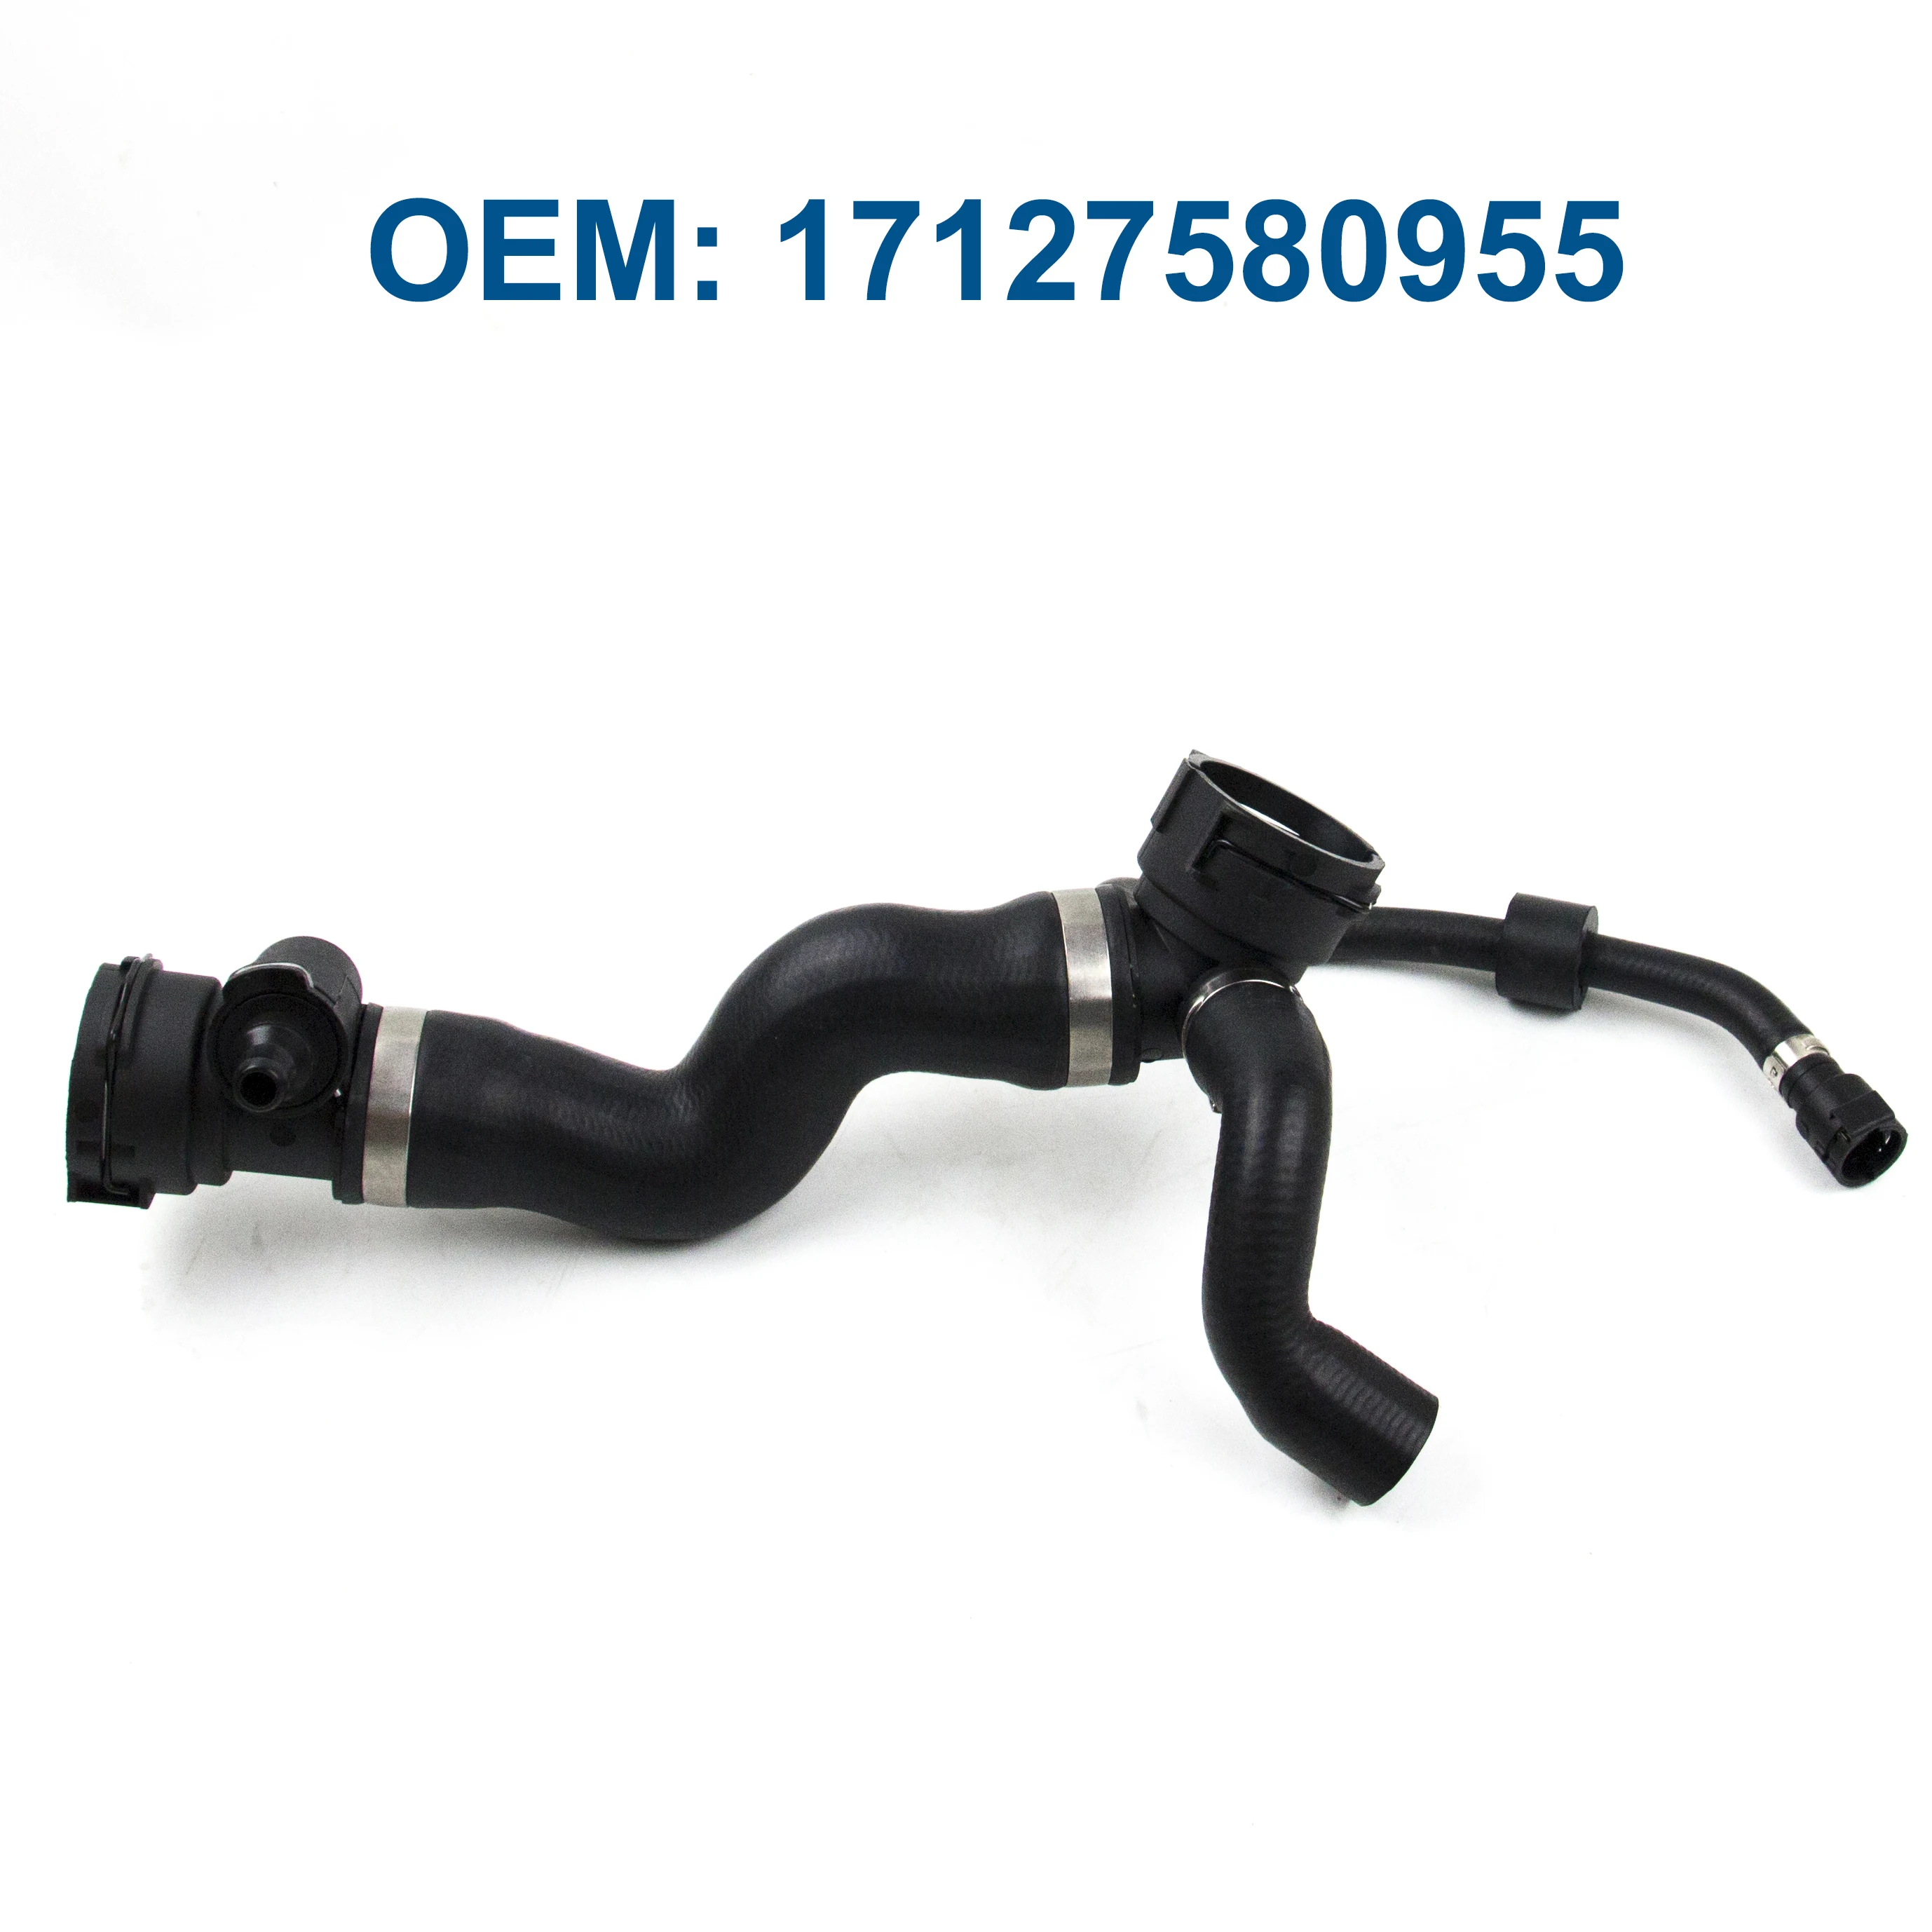 

17127580955 Water Tank Connection Upper Radiator Hose for BMW 7' F01/7' F02 730i Rubber Coolant Liquid Water Pipe Free Shipping